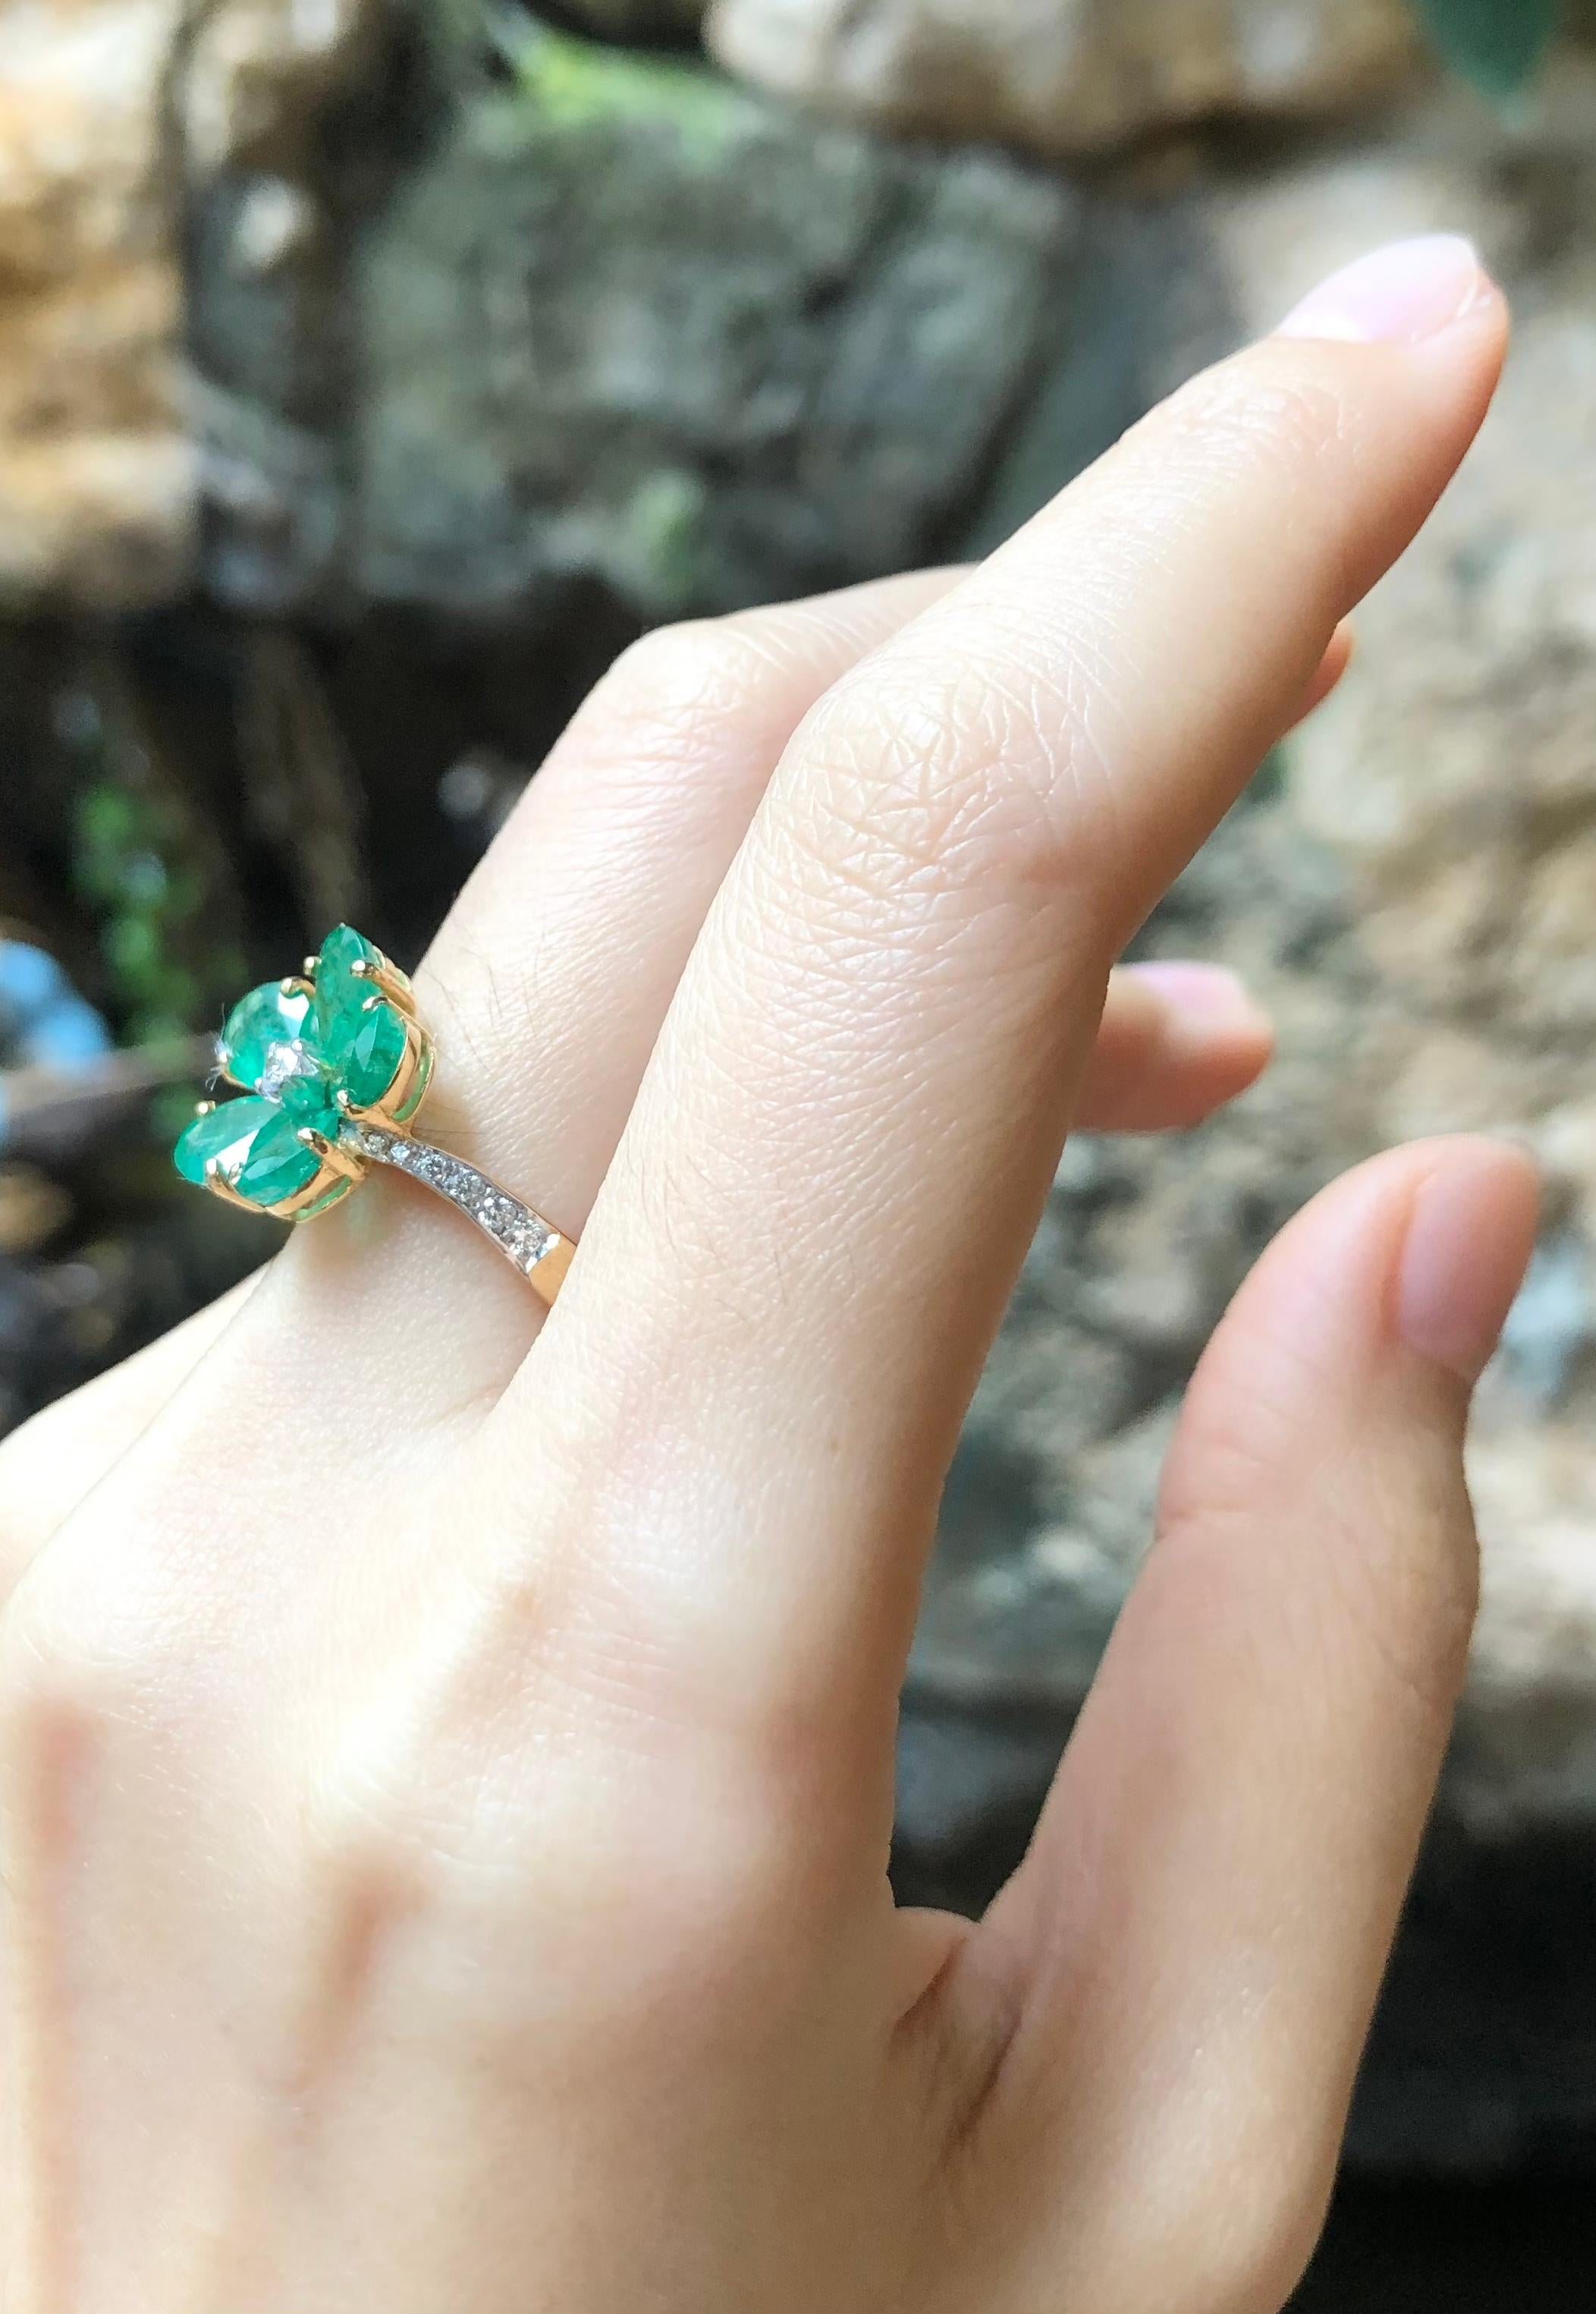 Emerald 2.81 carats with Diamond 0.15 carat Ring set in 18 Karat Gold Settings

Width:  1.2 cm 
Length: 1.2 cm
Ring Size: 52
Total Weight: 5.71 grams


